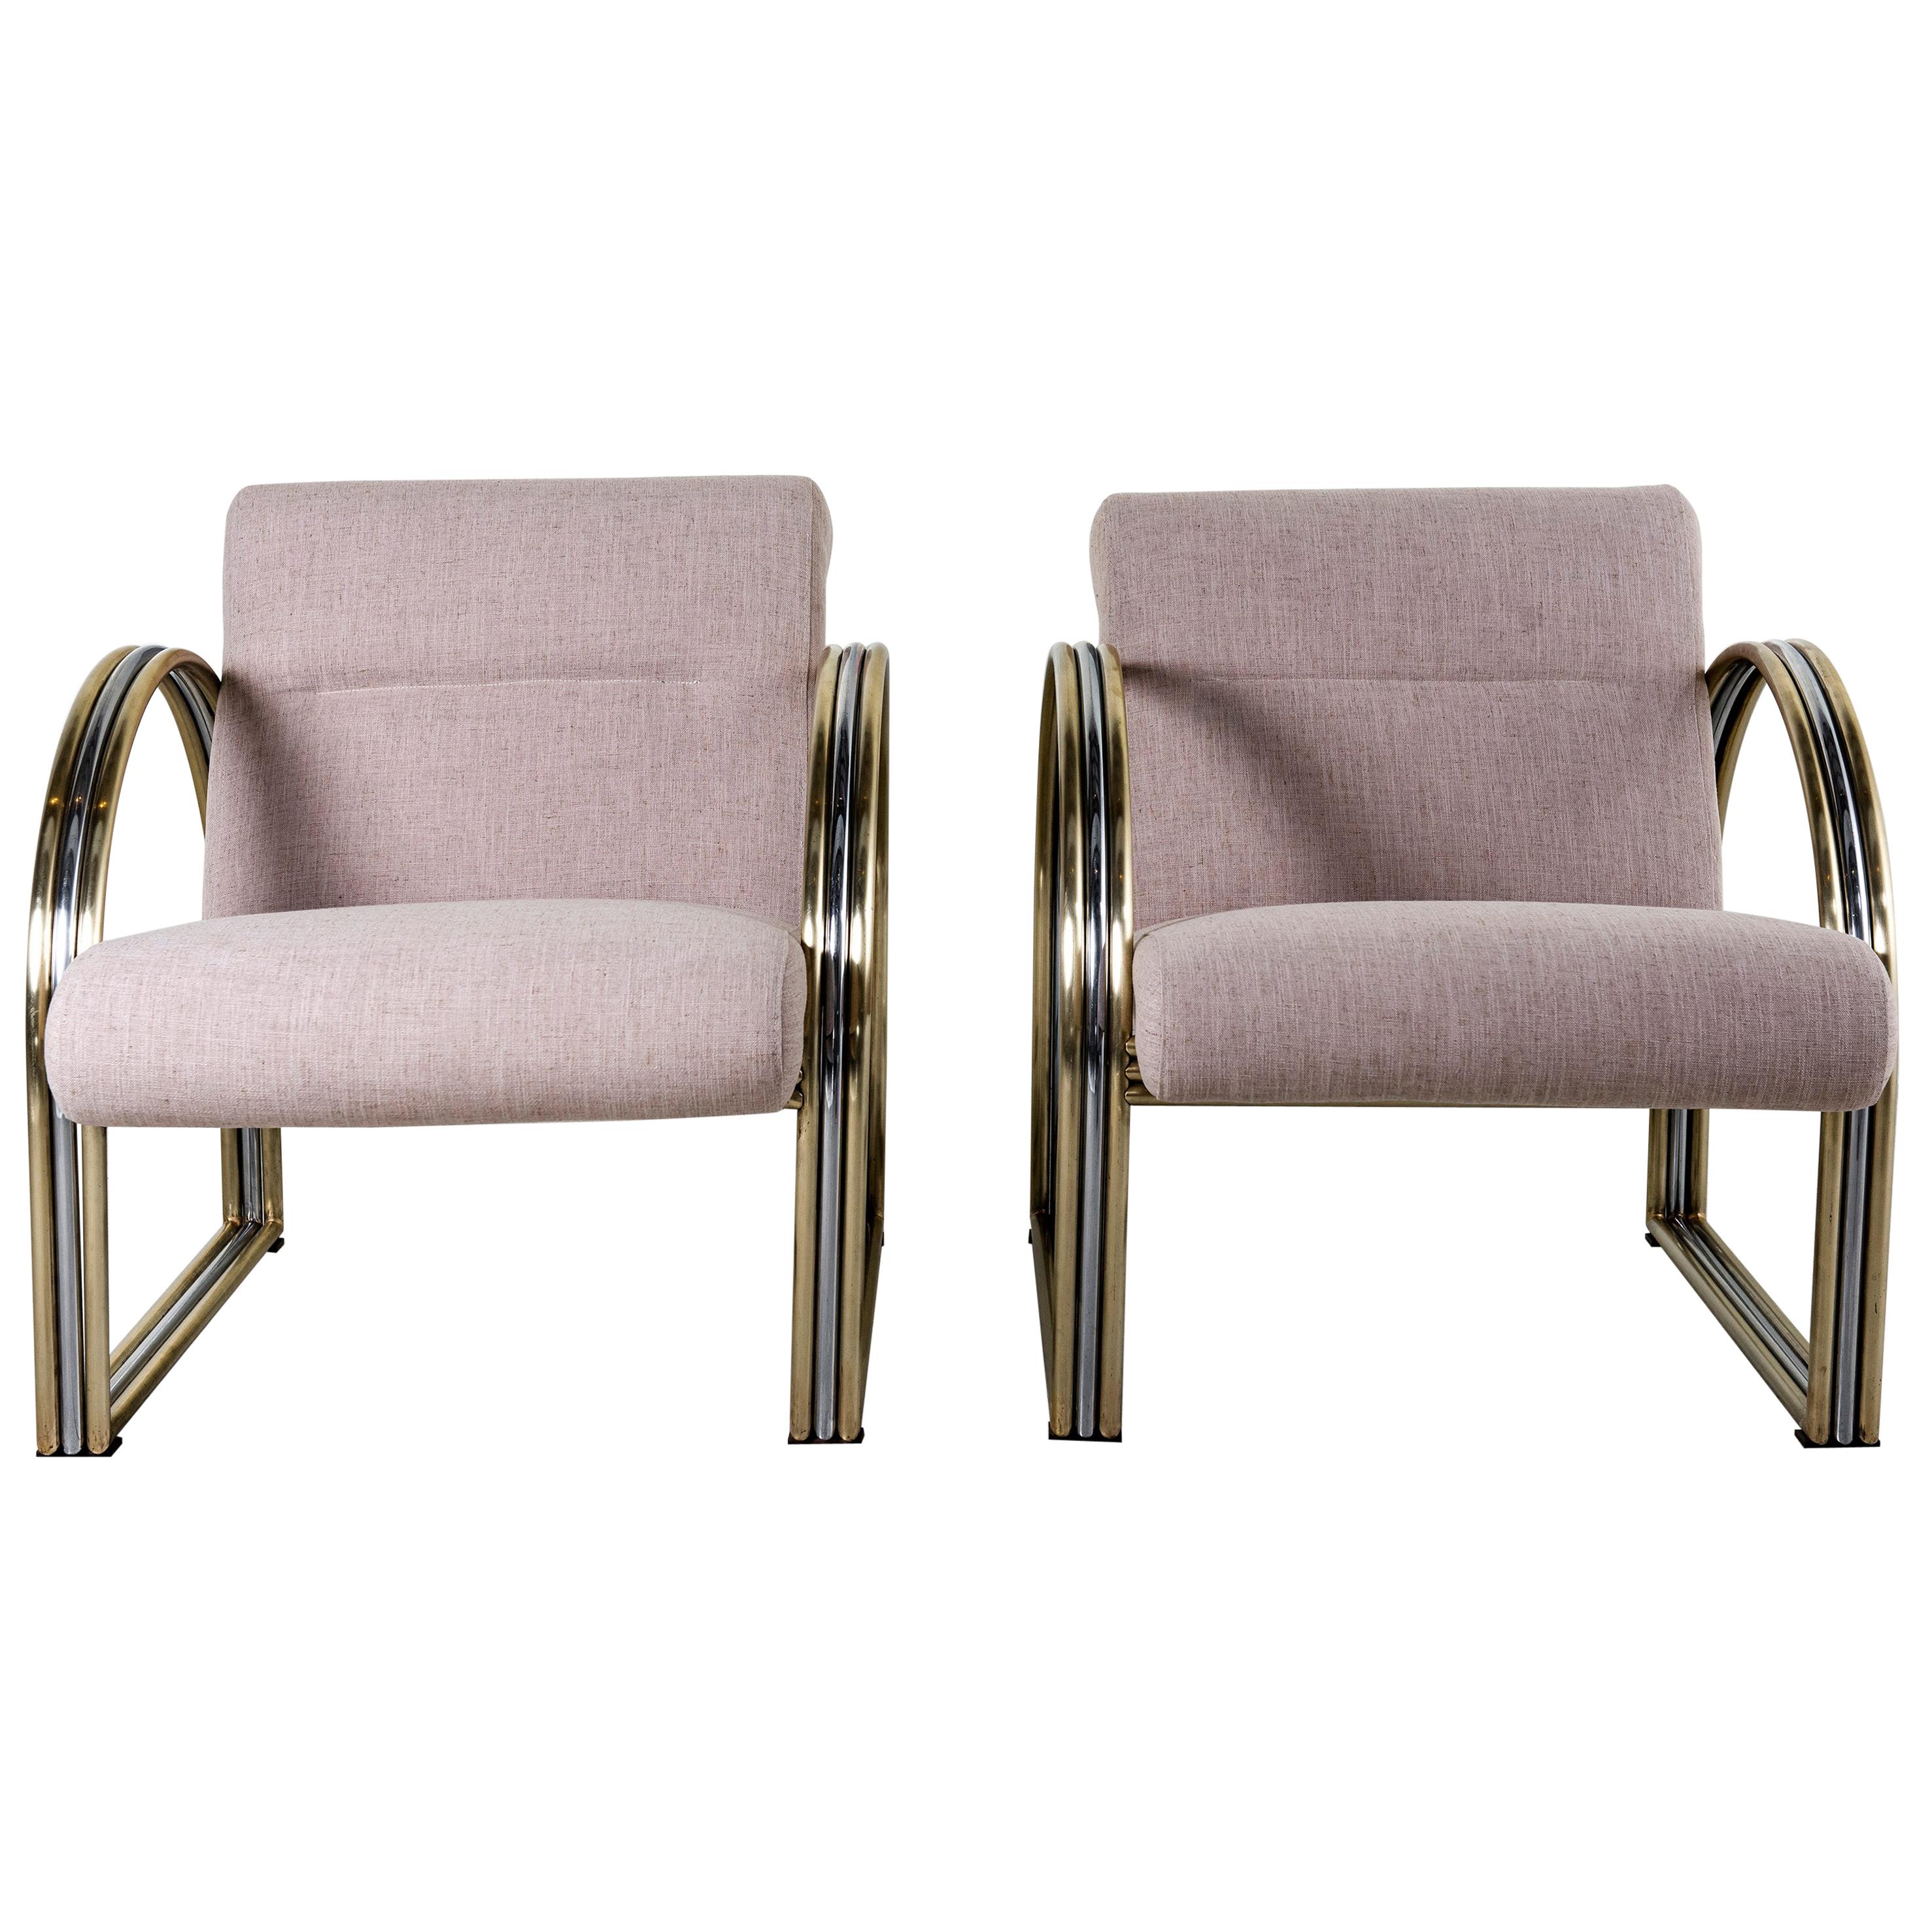 Pair of Chrome and Bronze Armchairs